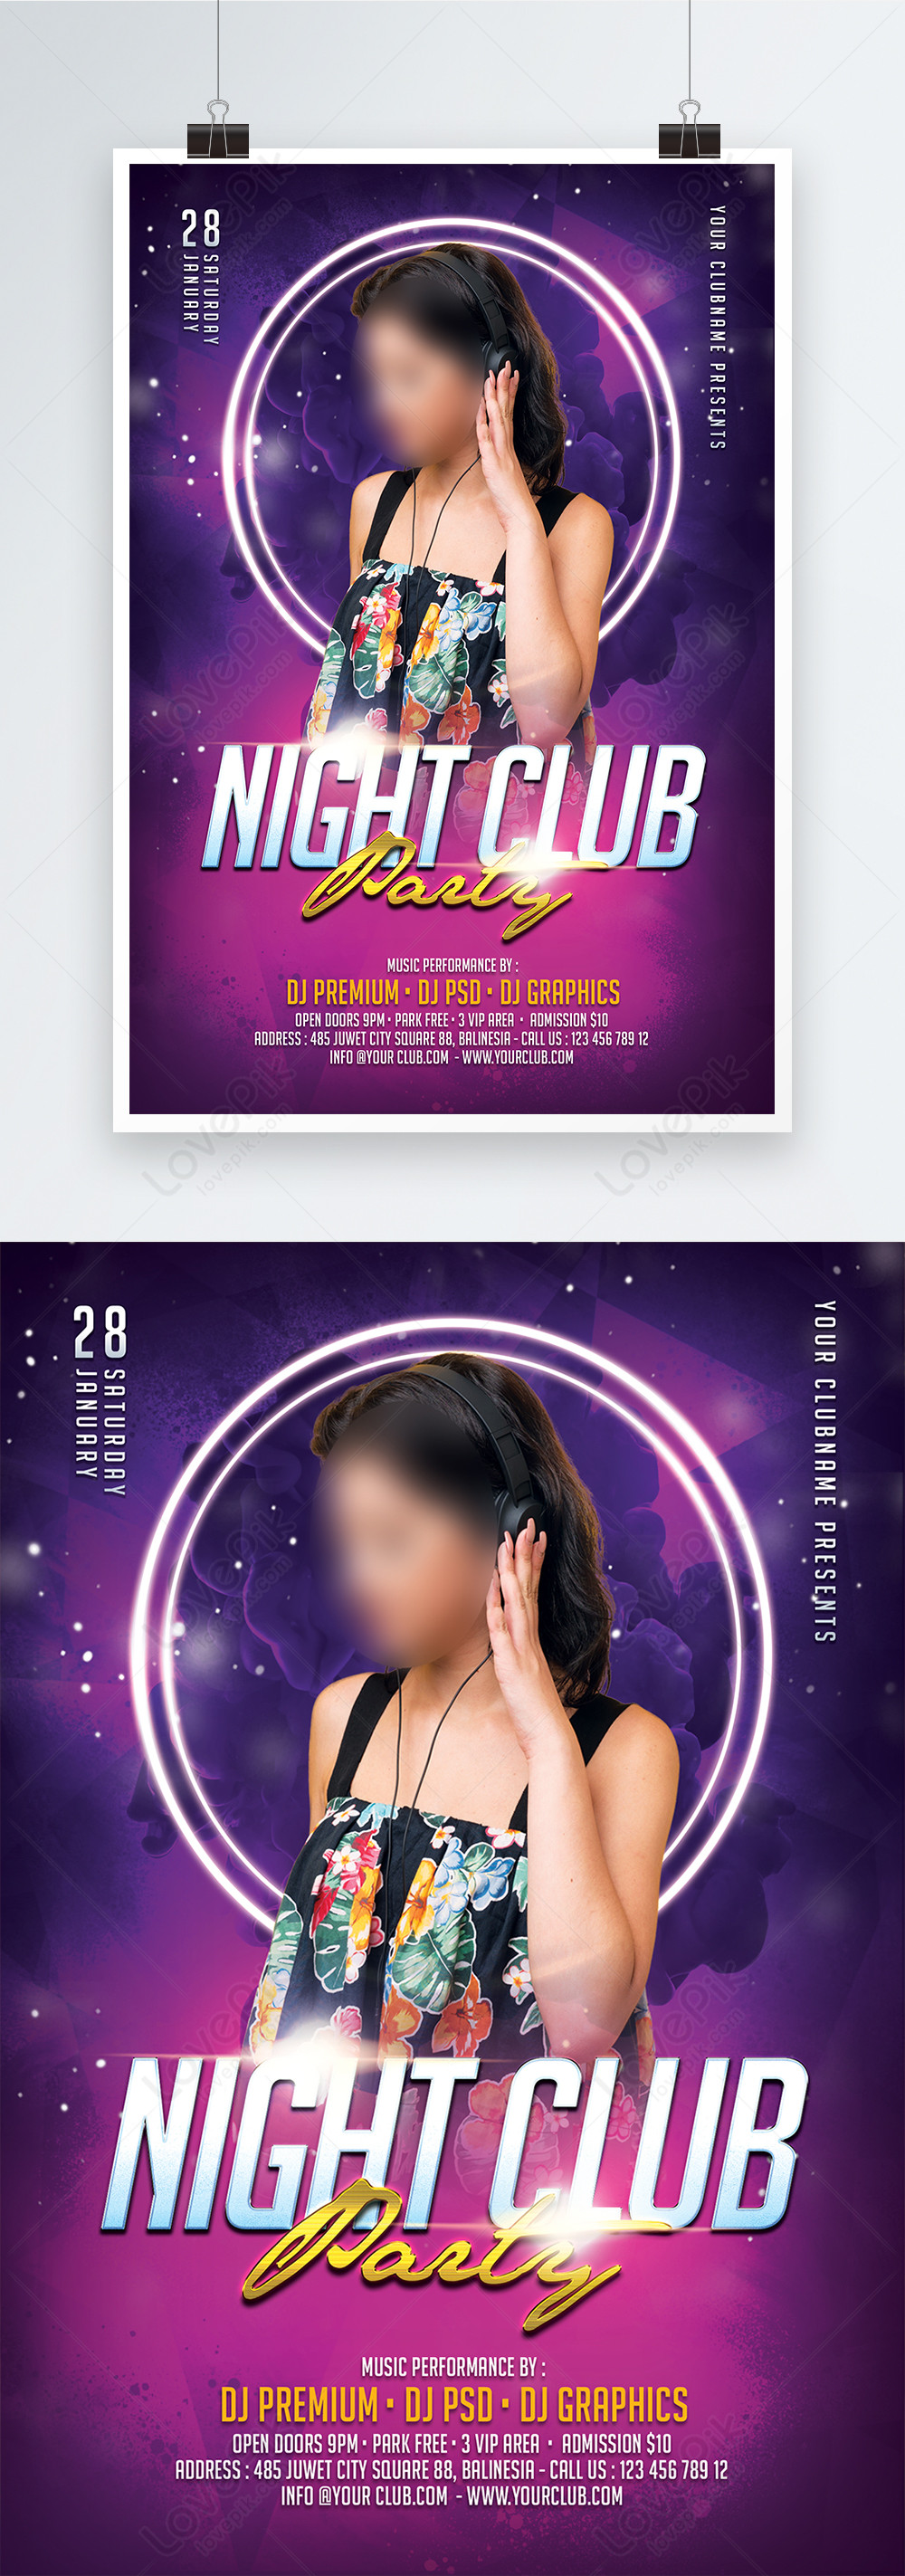 Nightclub flyer templates free download connectionsholden